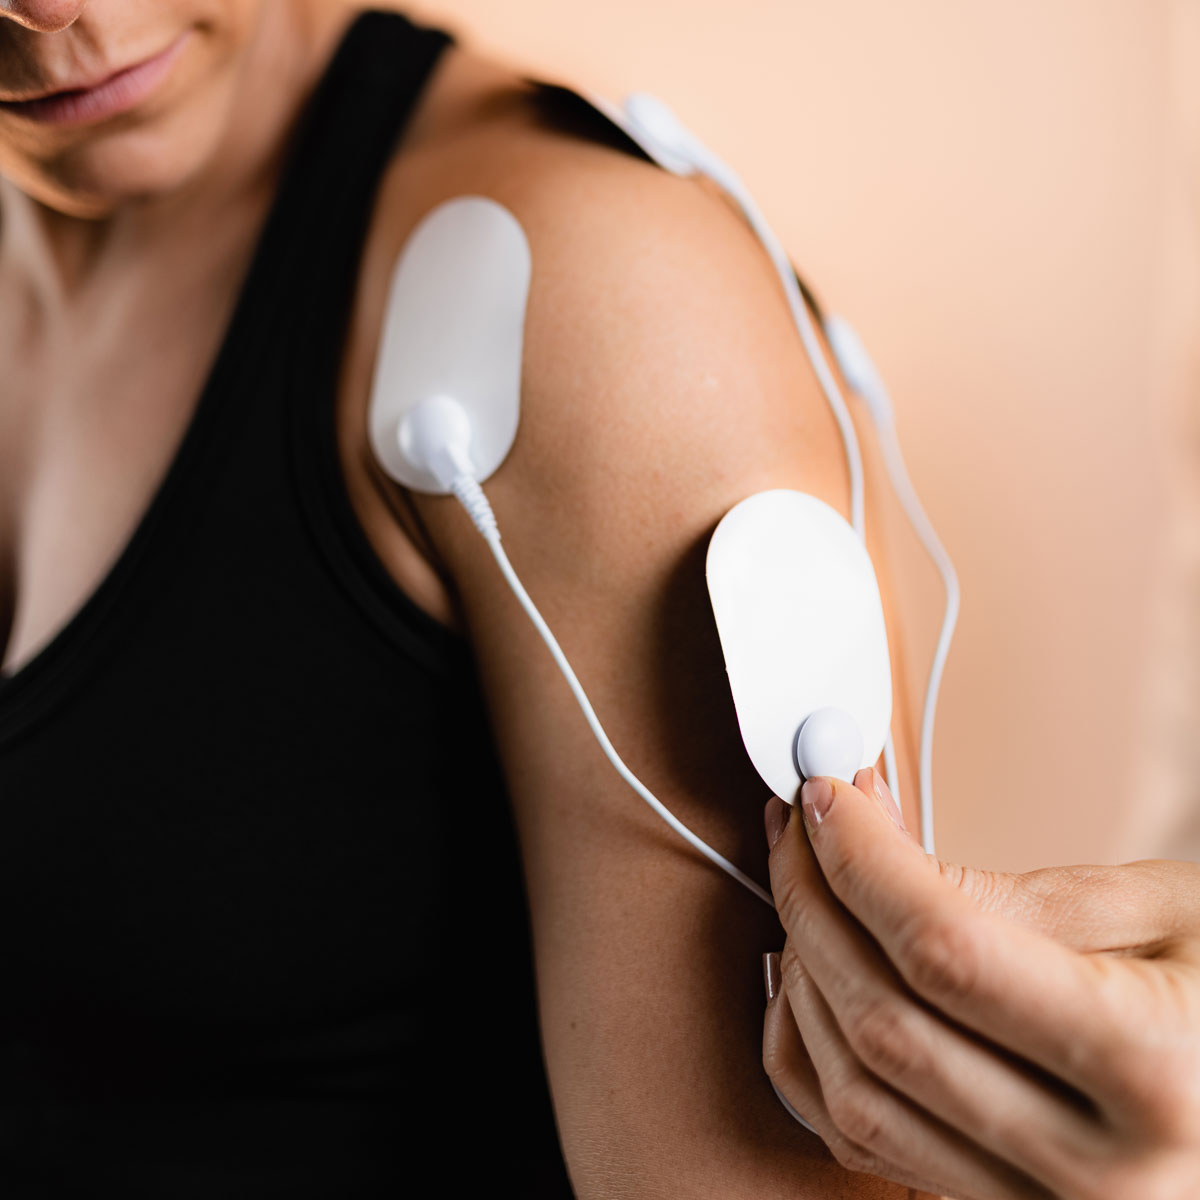 Top 10 Chiropractor Health Benefits of Electric Muscle Stimulation